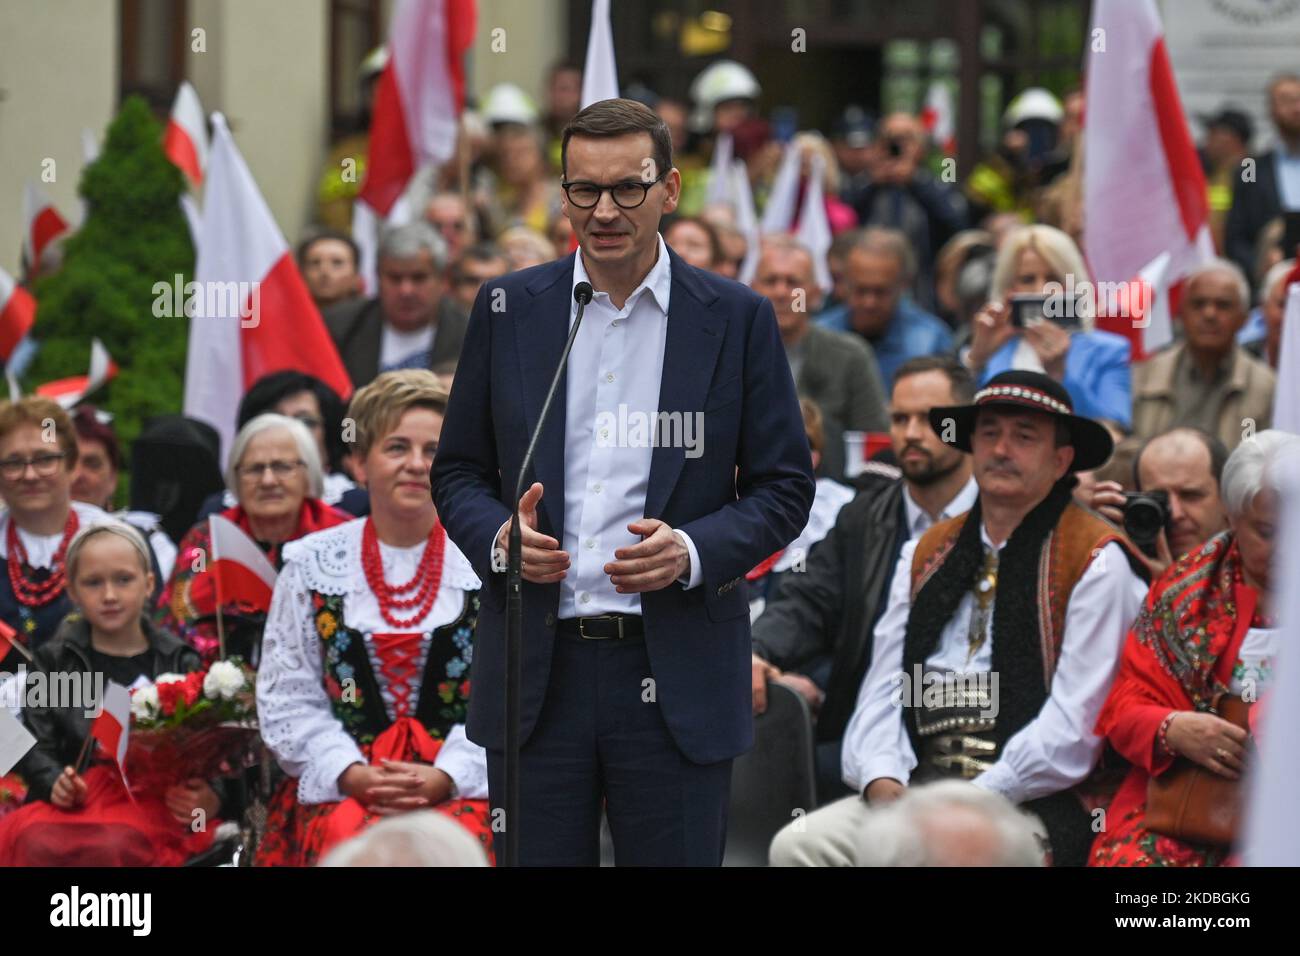 Polish Prime Minister Mateusz Morawiecki speaks to the inhabitants of Olkusz. Mateusz Morawiecki set off to meet the Poles. The first stop of the head of the Polish government was Olkusz near Krakow, where, after handing over a modern ambulance to a local hospital, he met the inhabitants of the city. On Saturday, June 04, 2022, in Olkusz, Lesser Poland Voivodeship, Poland. (Photo by Artur Widak/NurPhoto) Stock Photo